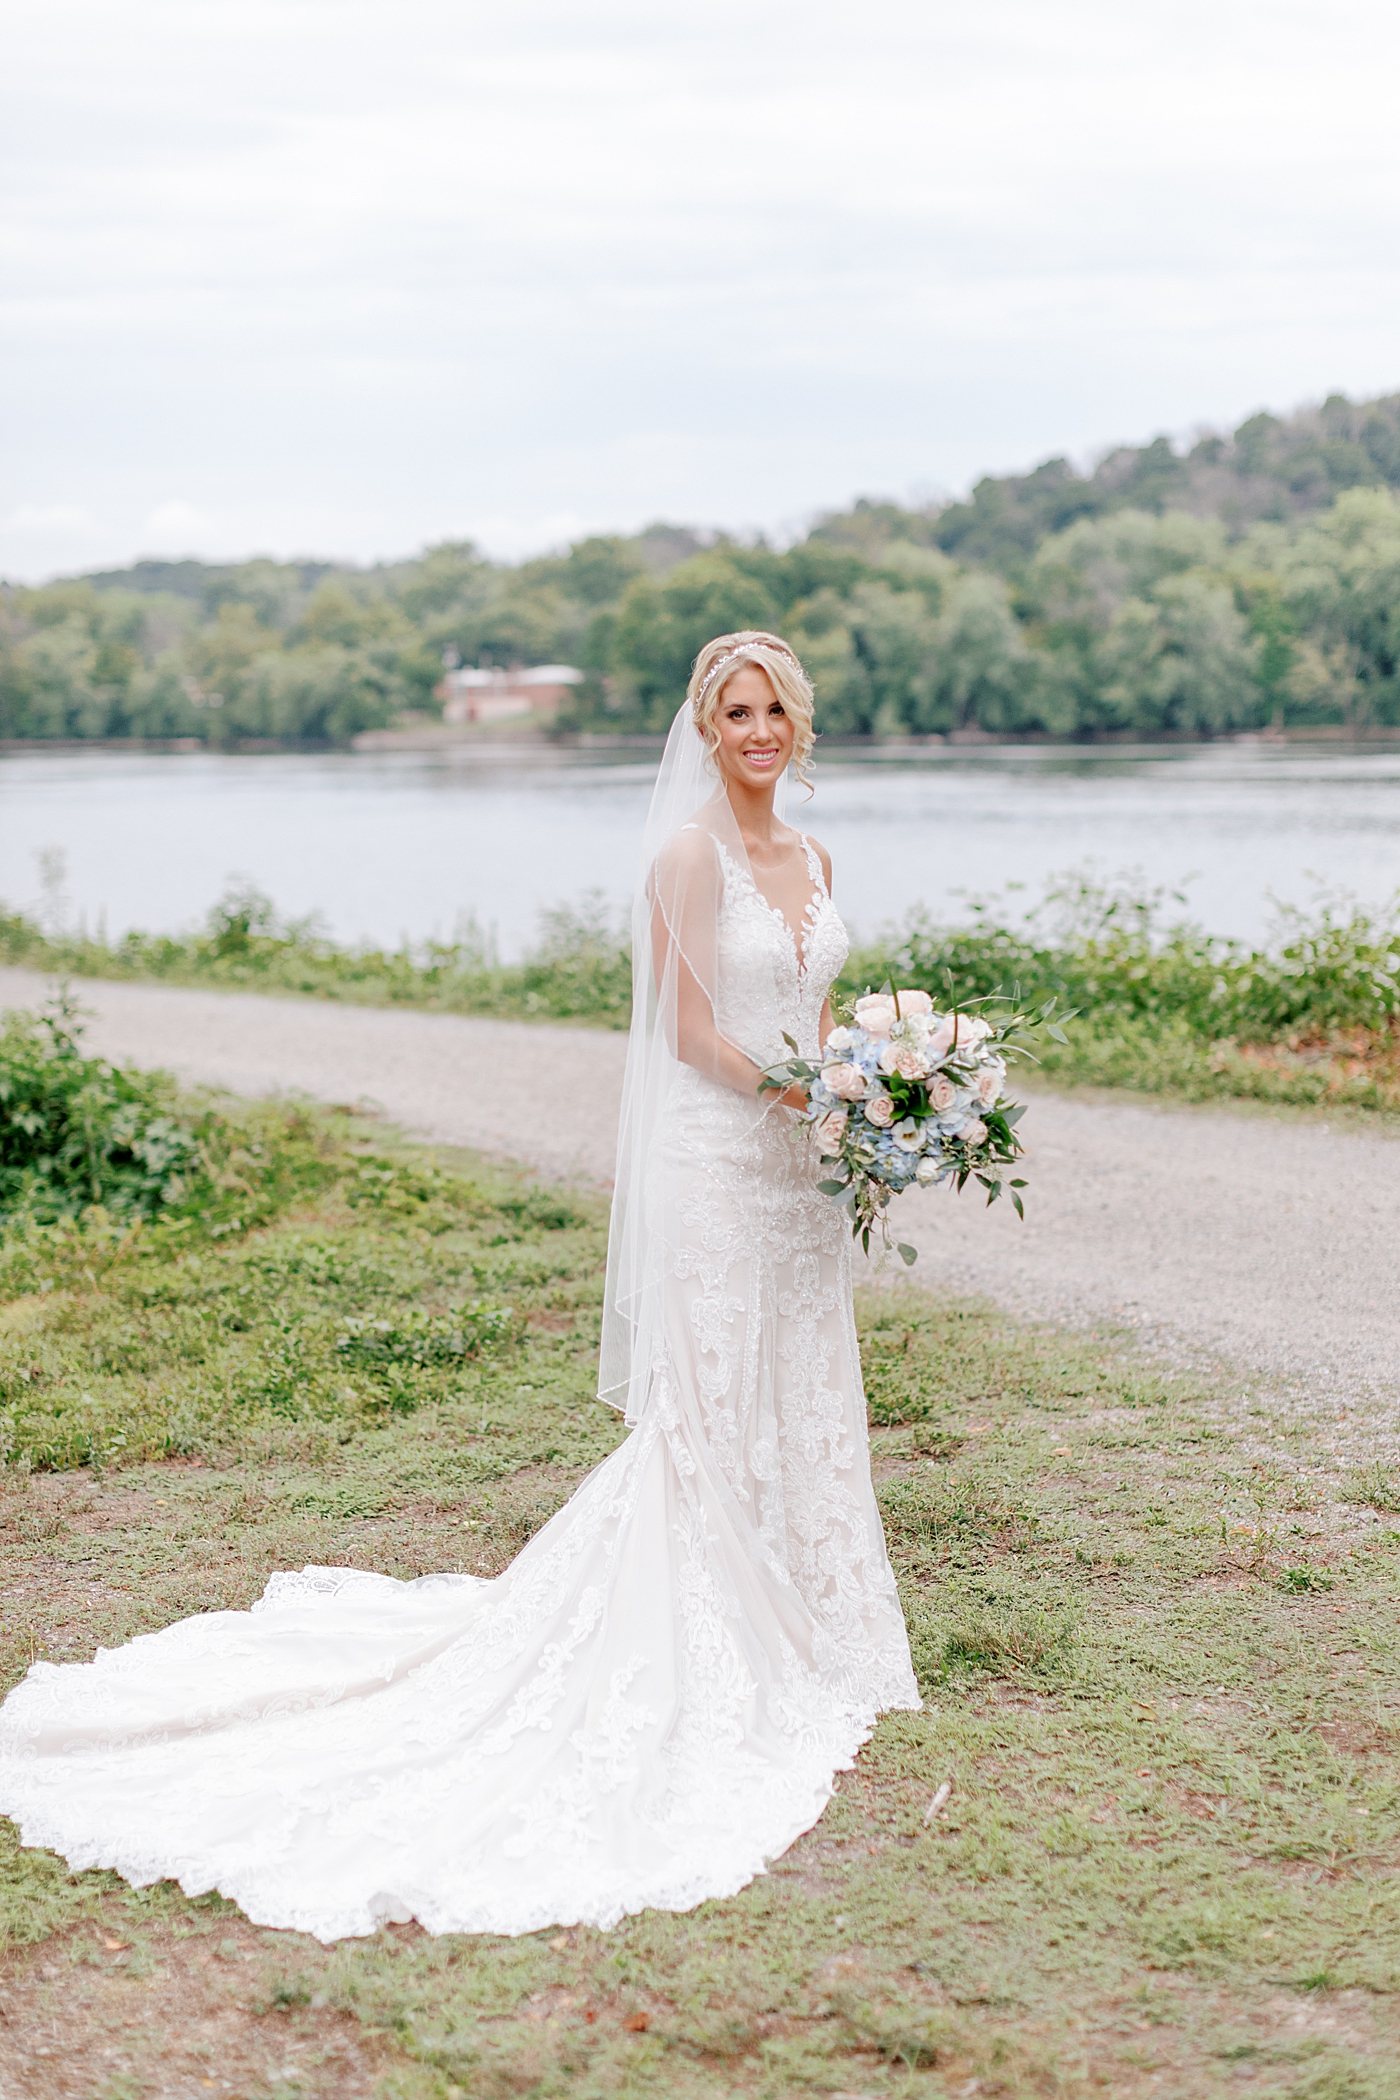 Bride smiling and holding her bouquet | Image by Hope Helmuth Photography